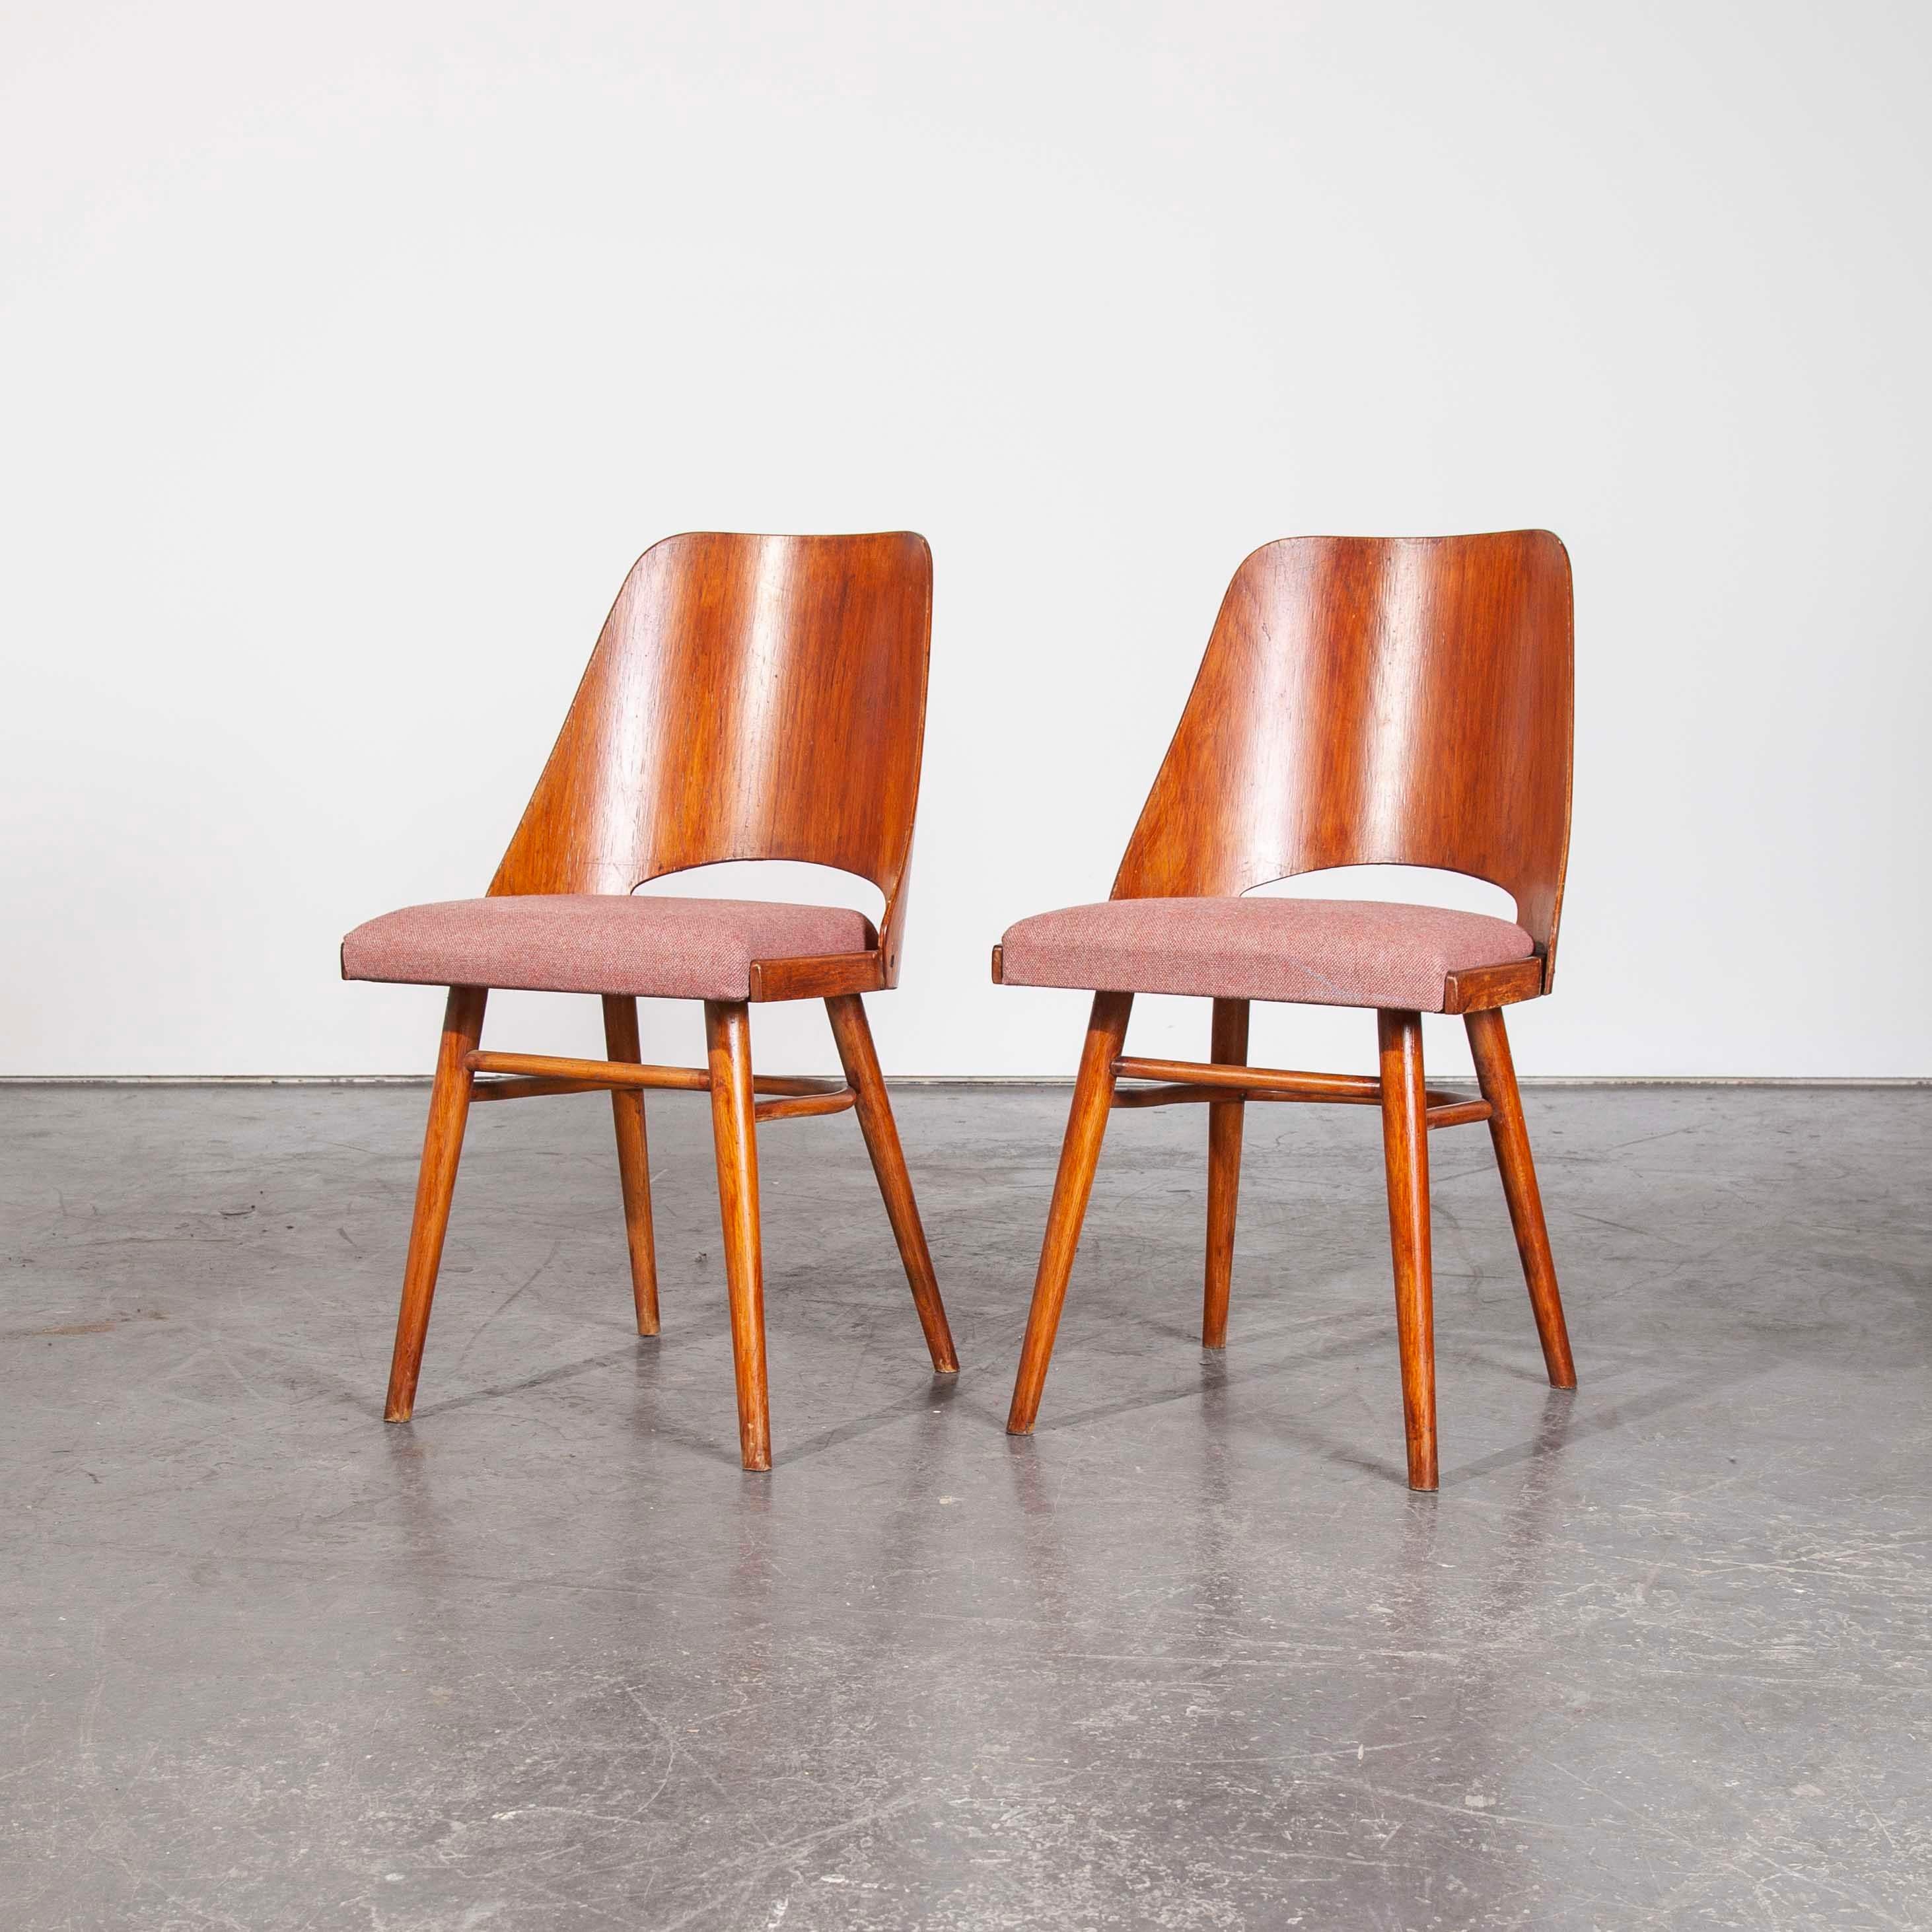 Czech Pair of 1950s Re- Upholstered Thon Dining Chairs, Radomir Hoffman